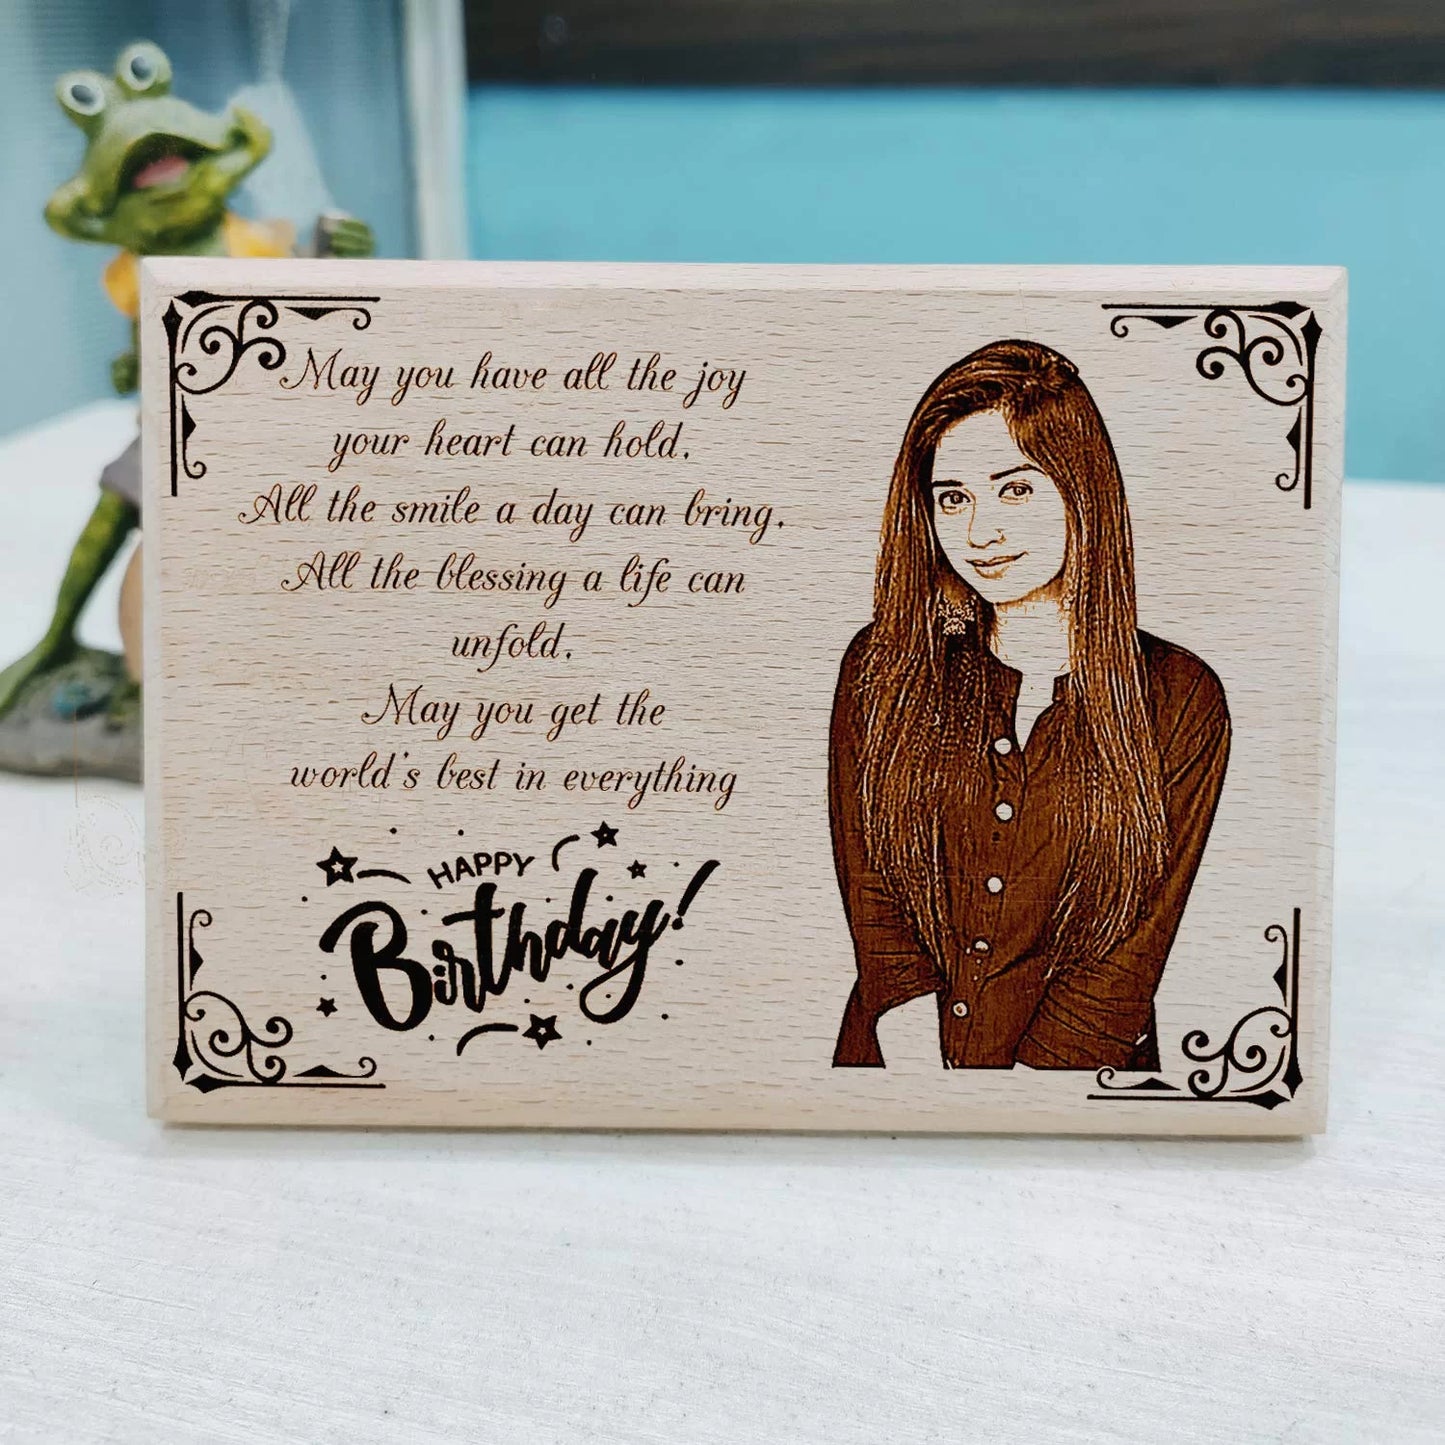 Personalized Engraved Wooden Photo Plaque Gift for Women Birthday Special